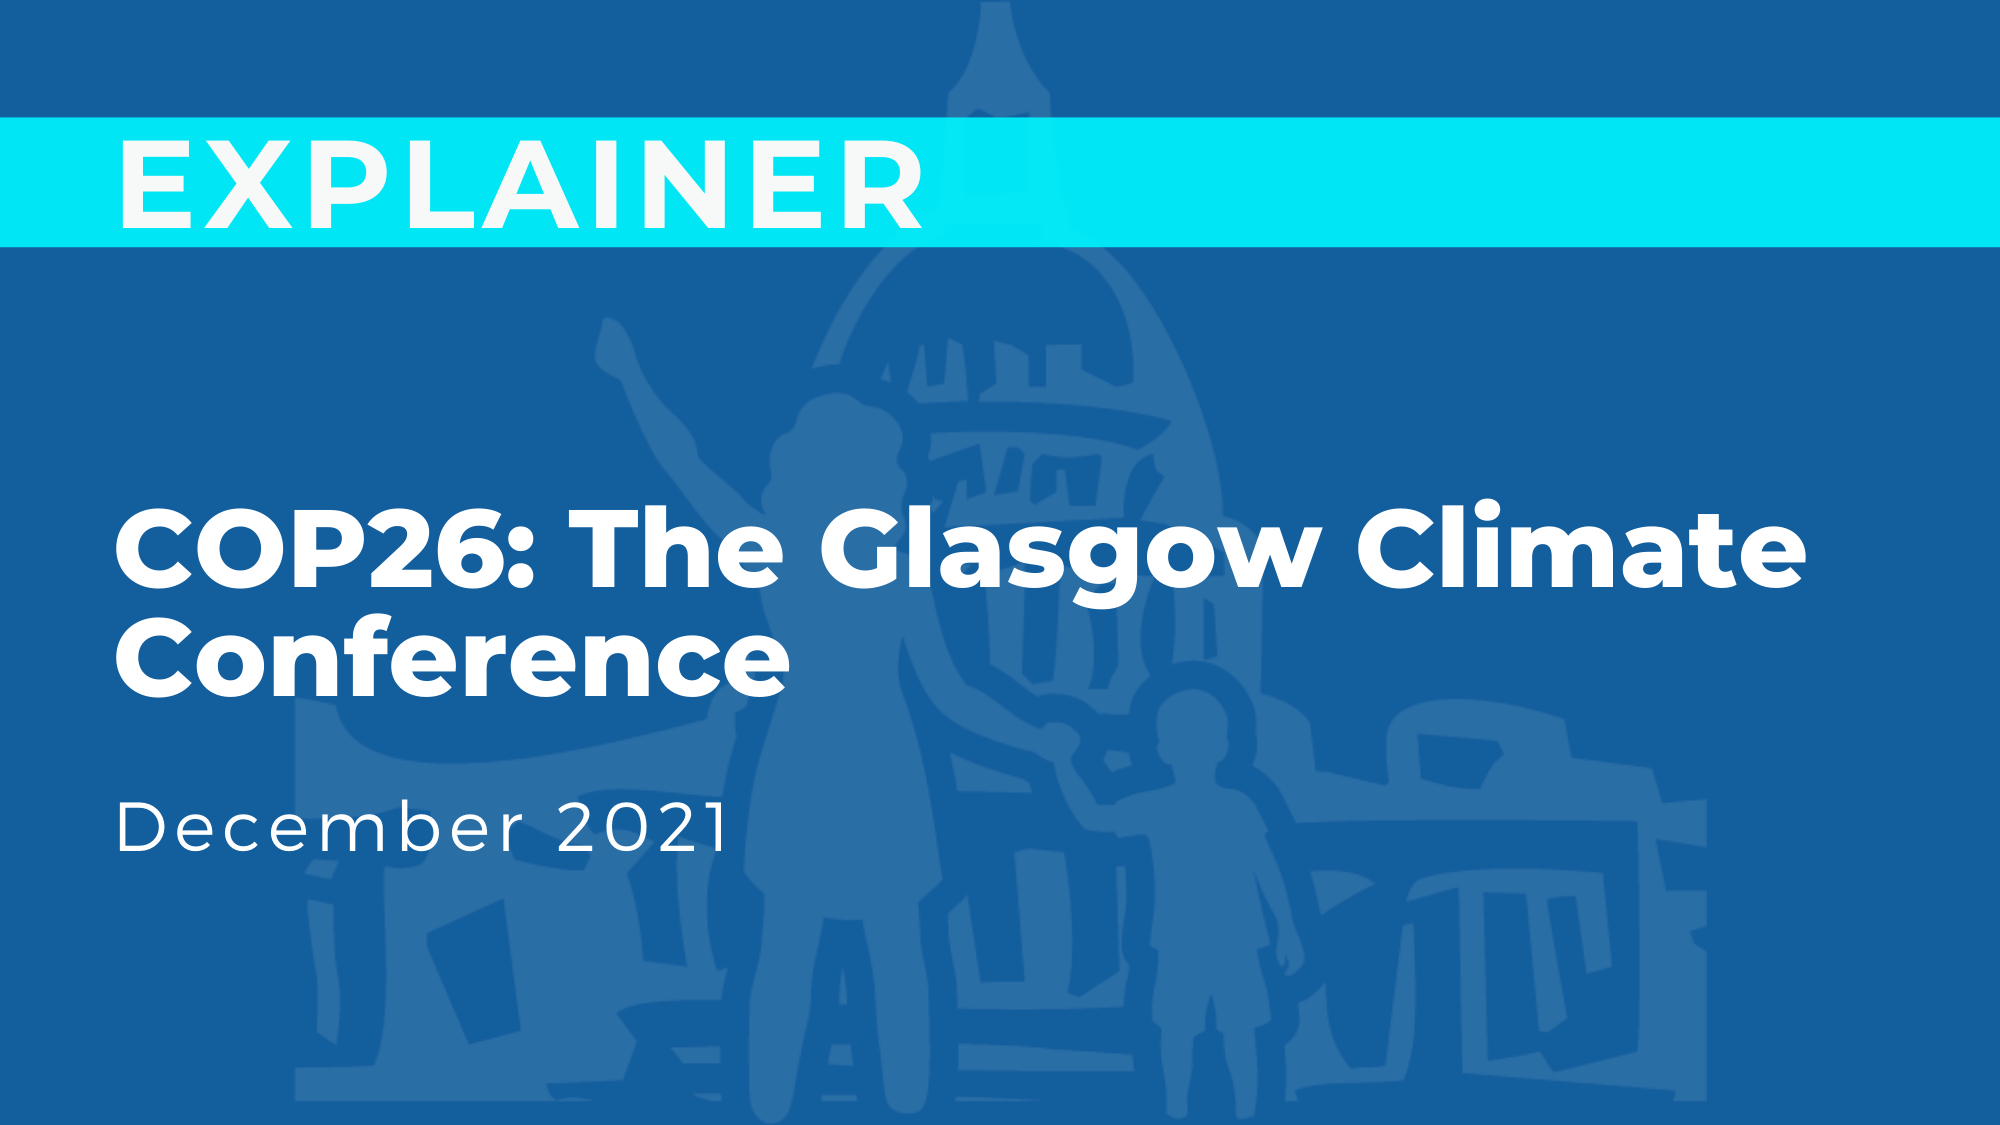 COP26: The Glasgow Climate Conference